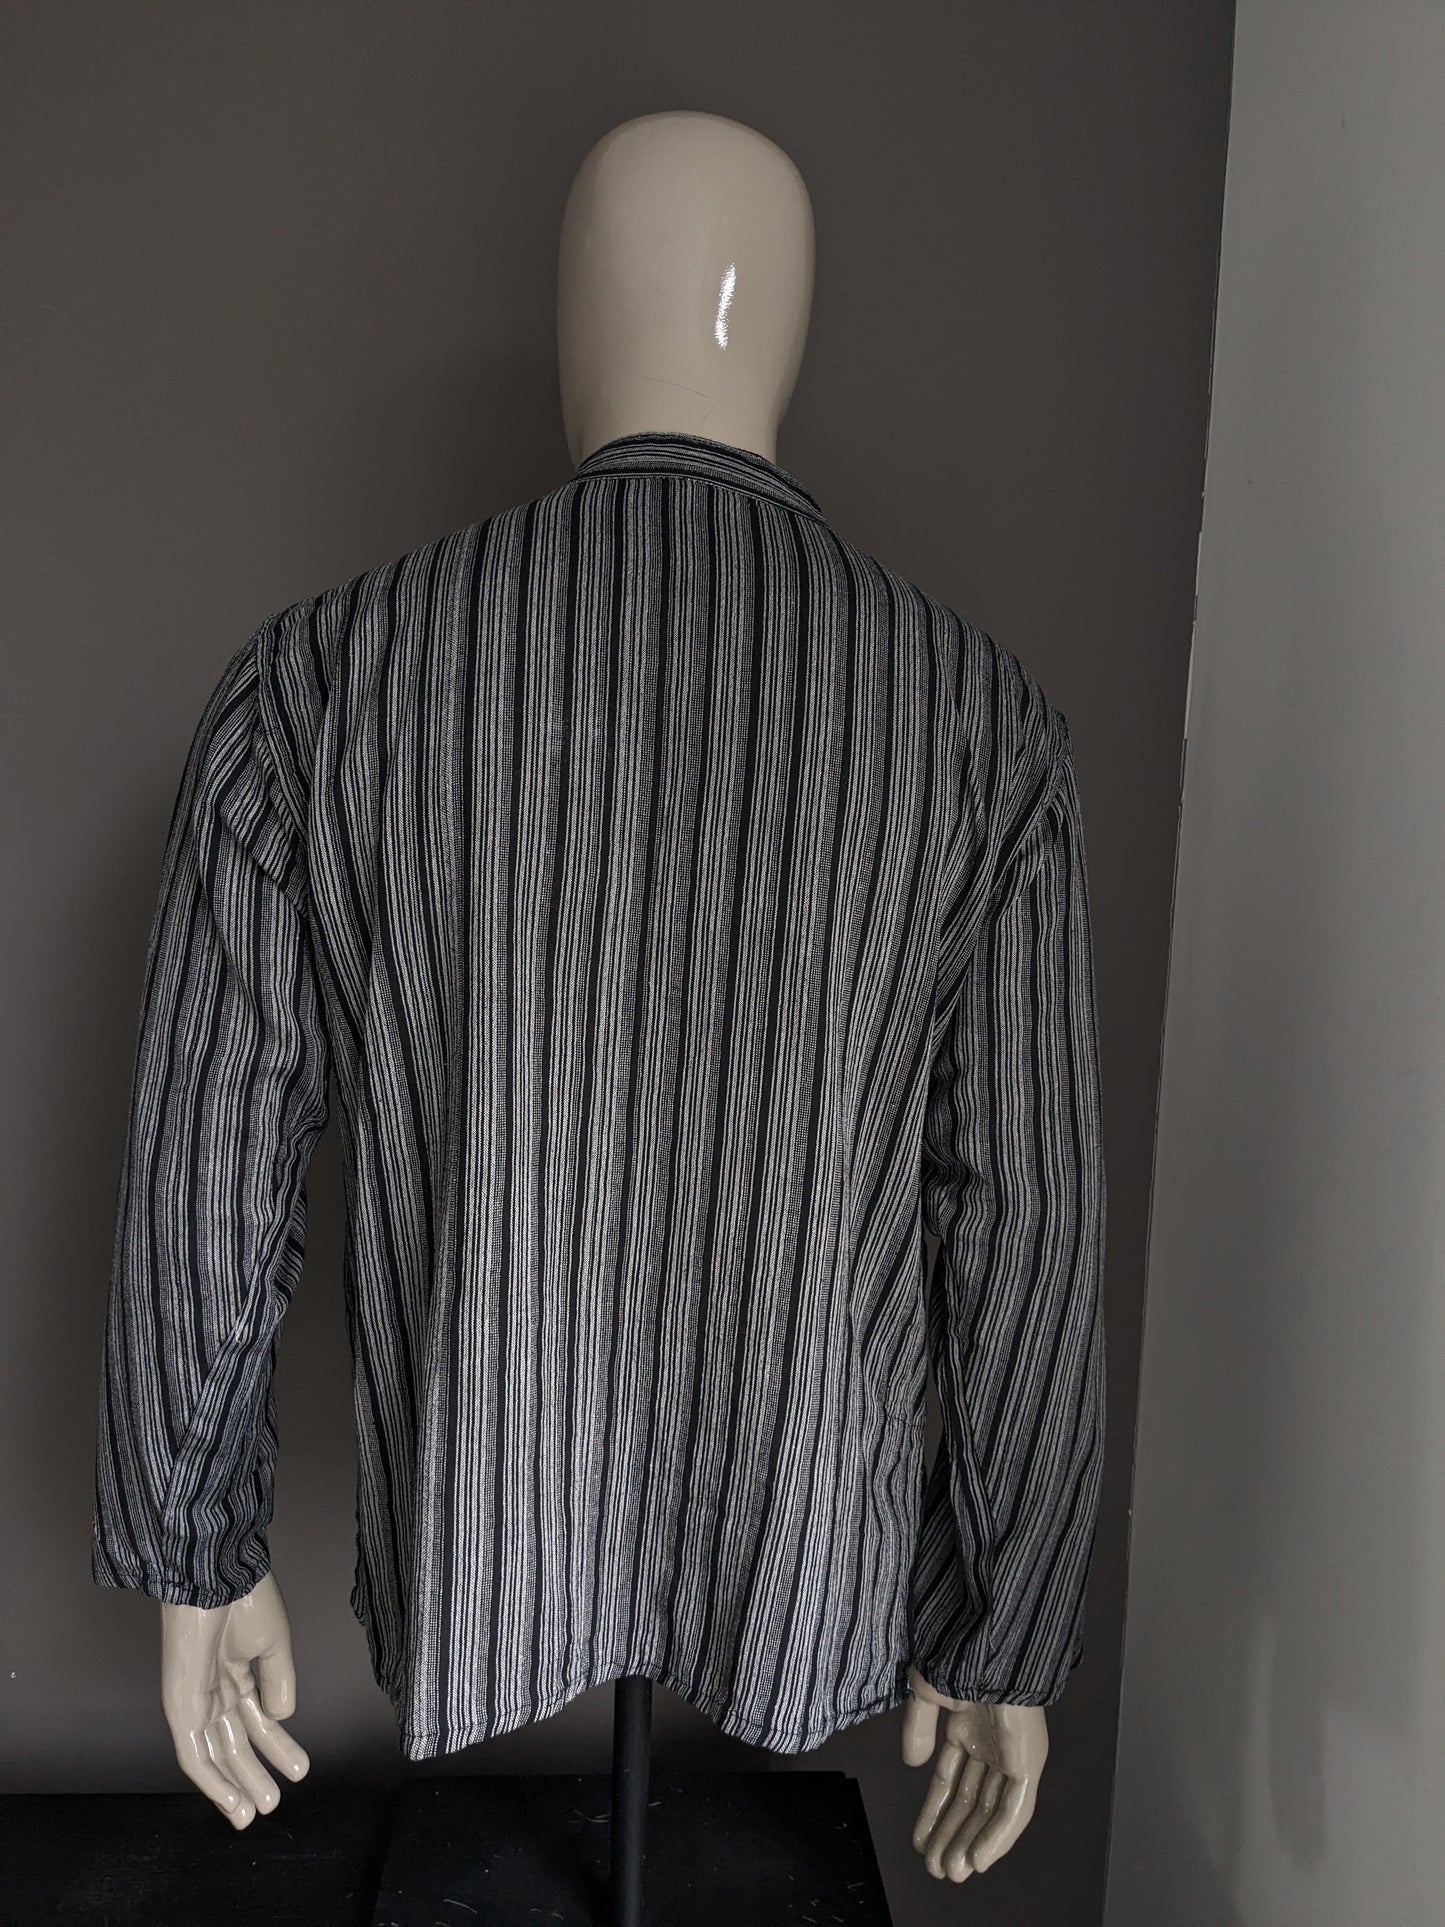 Vintage yuli polo sweater / shirt with raised / farmers / mao collar. Black gray striped with bag. Size XL.